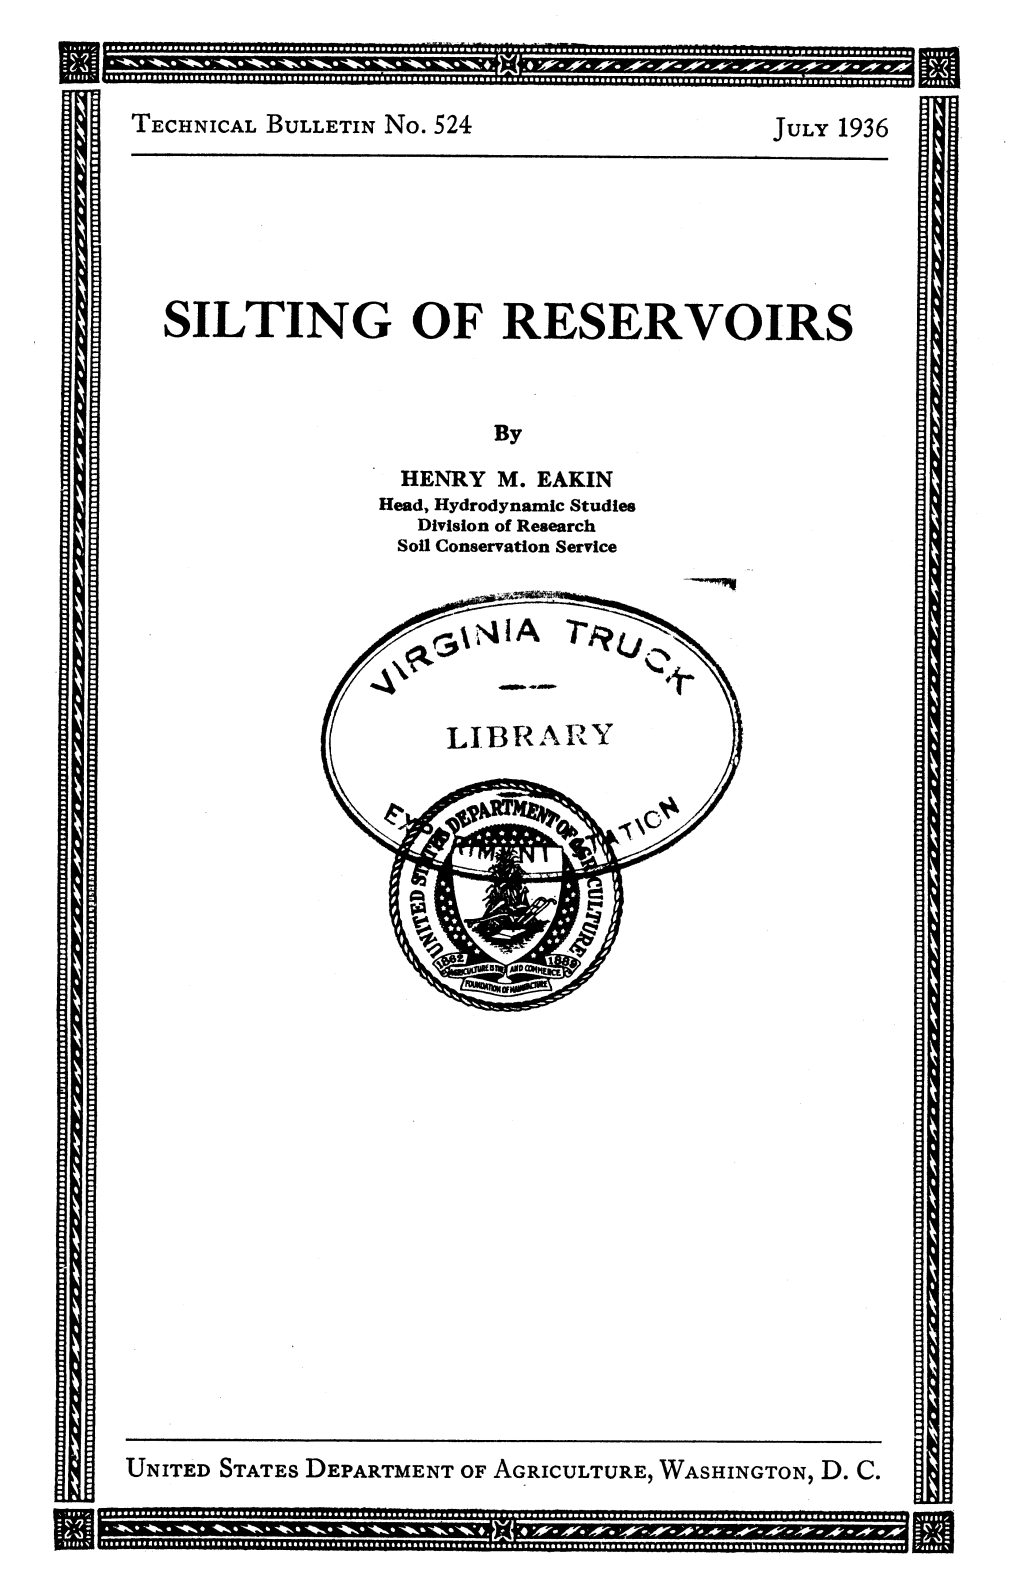 Silting of Reservoirs